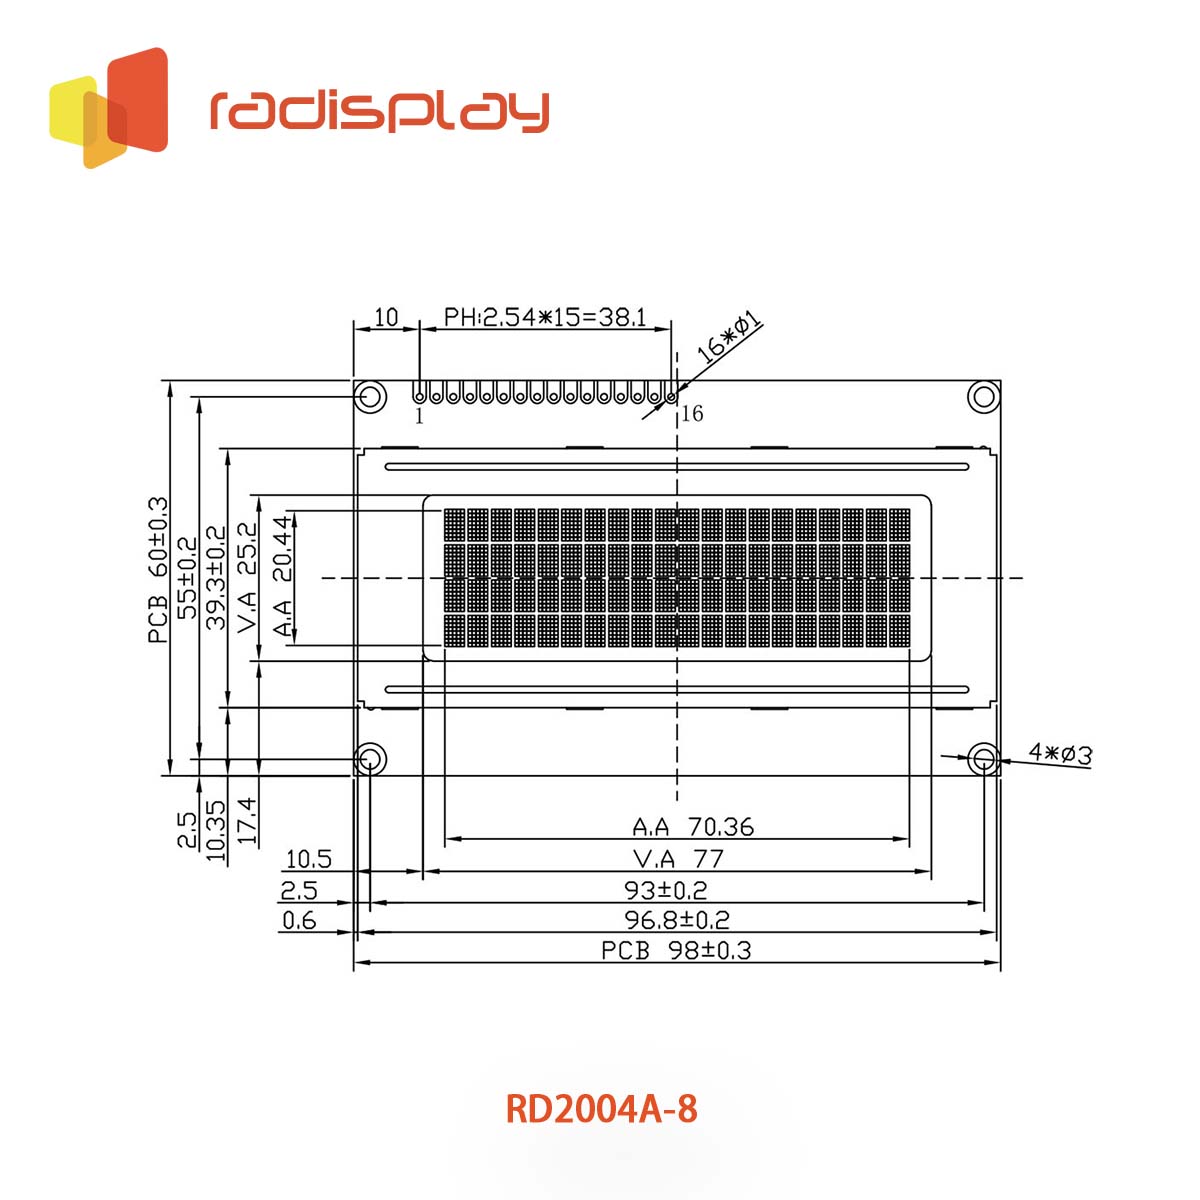 20x4 Character LCD Display Module (RD2004A-8)